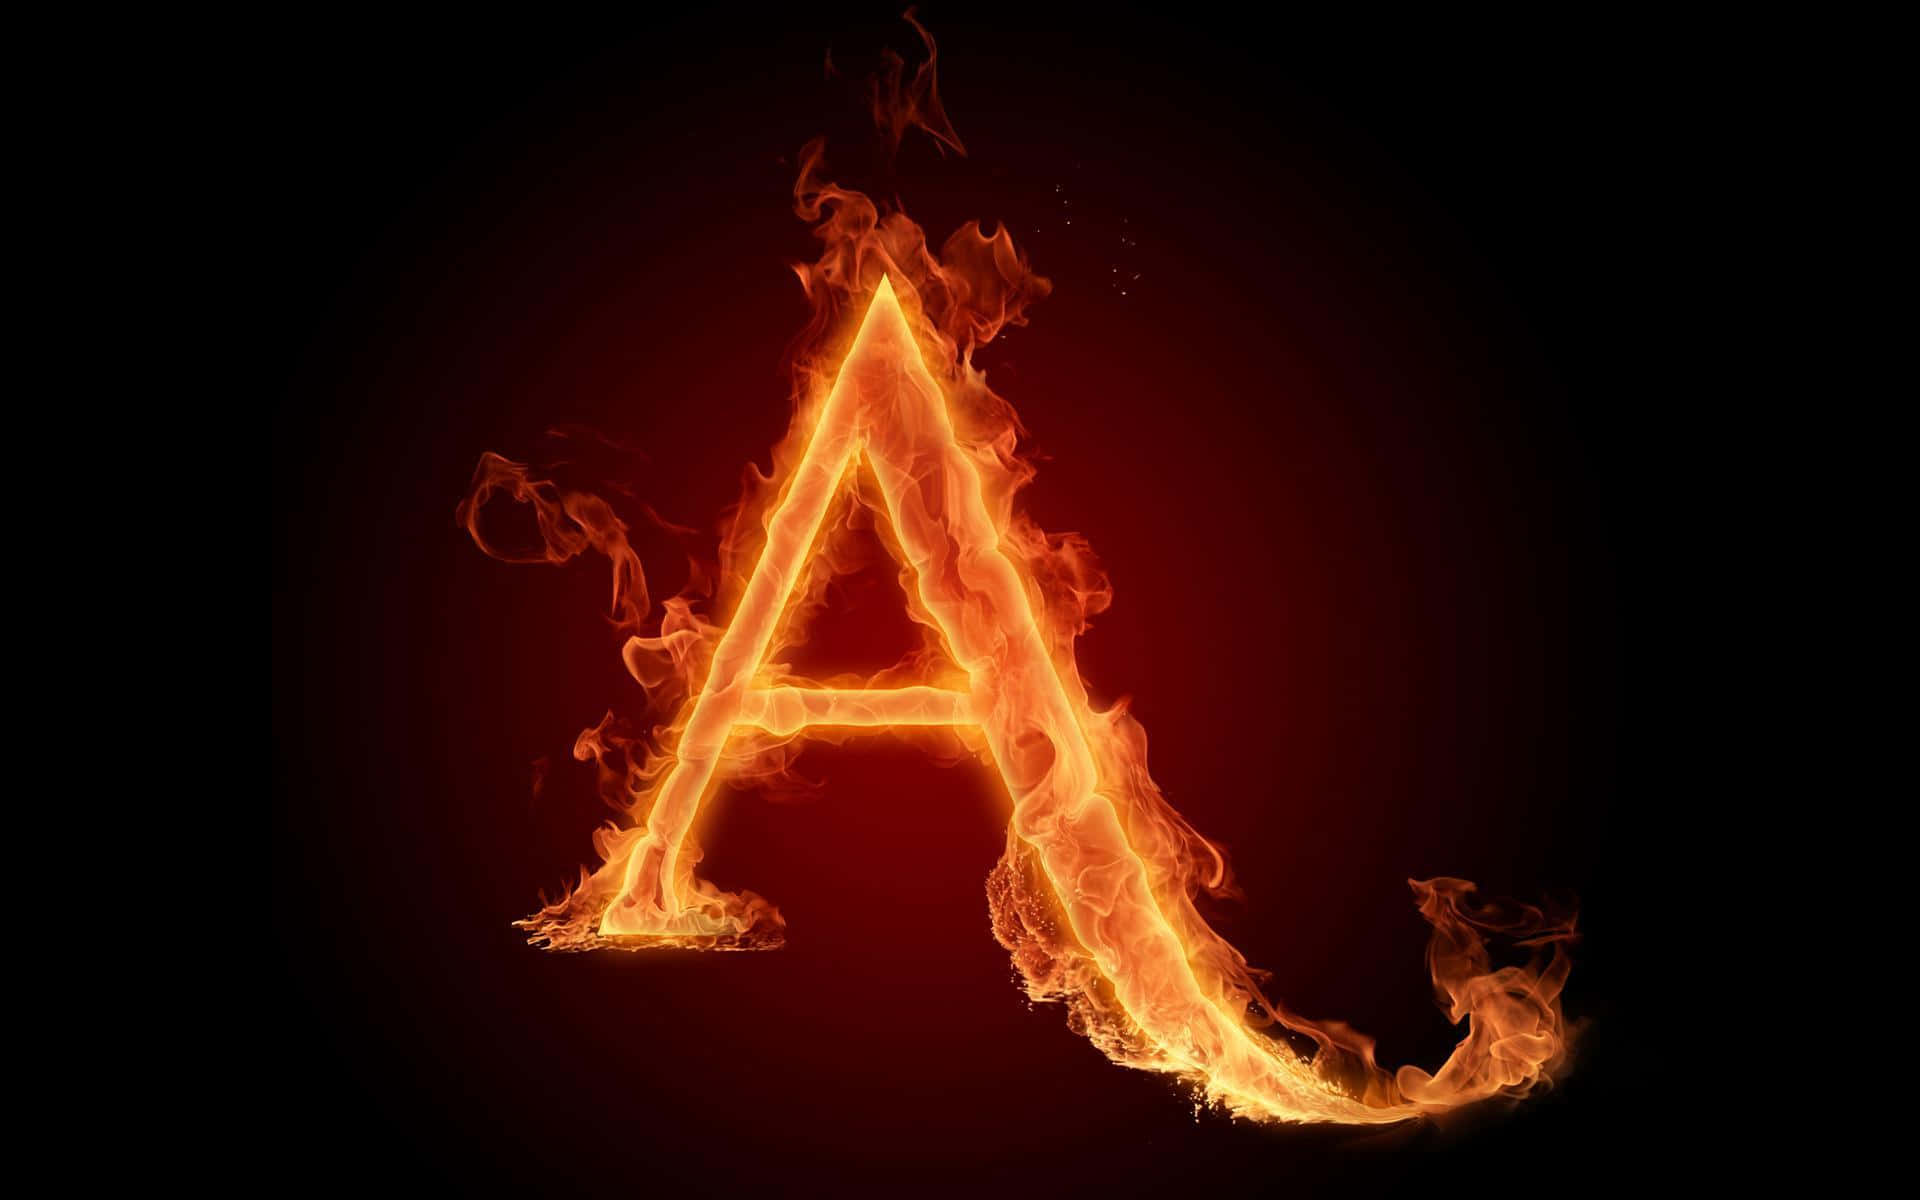 a letter in flames on a black background